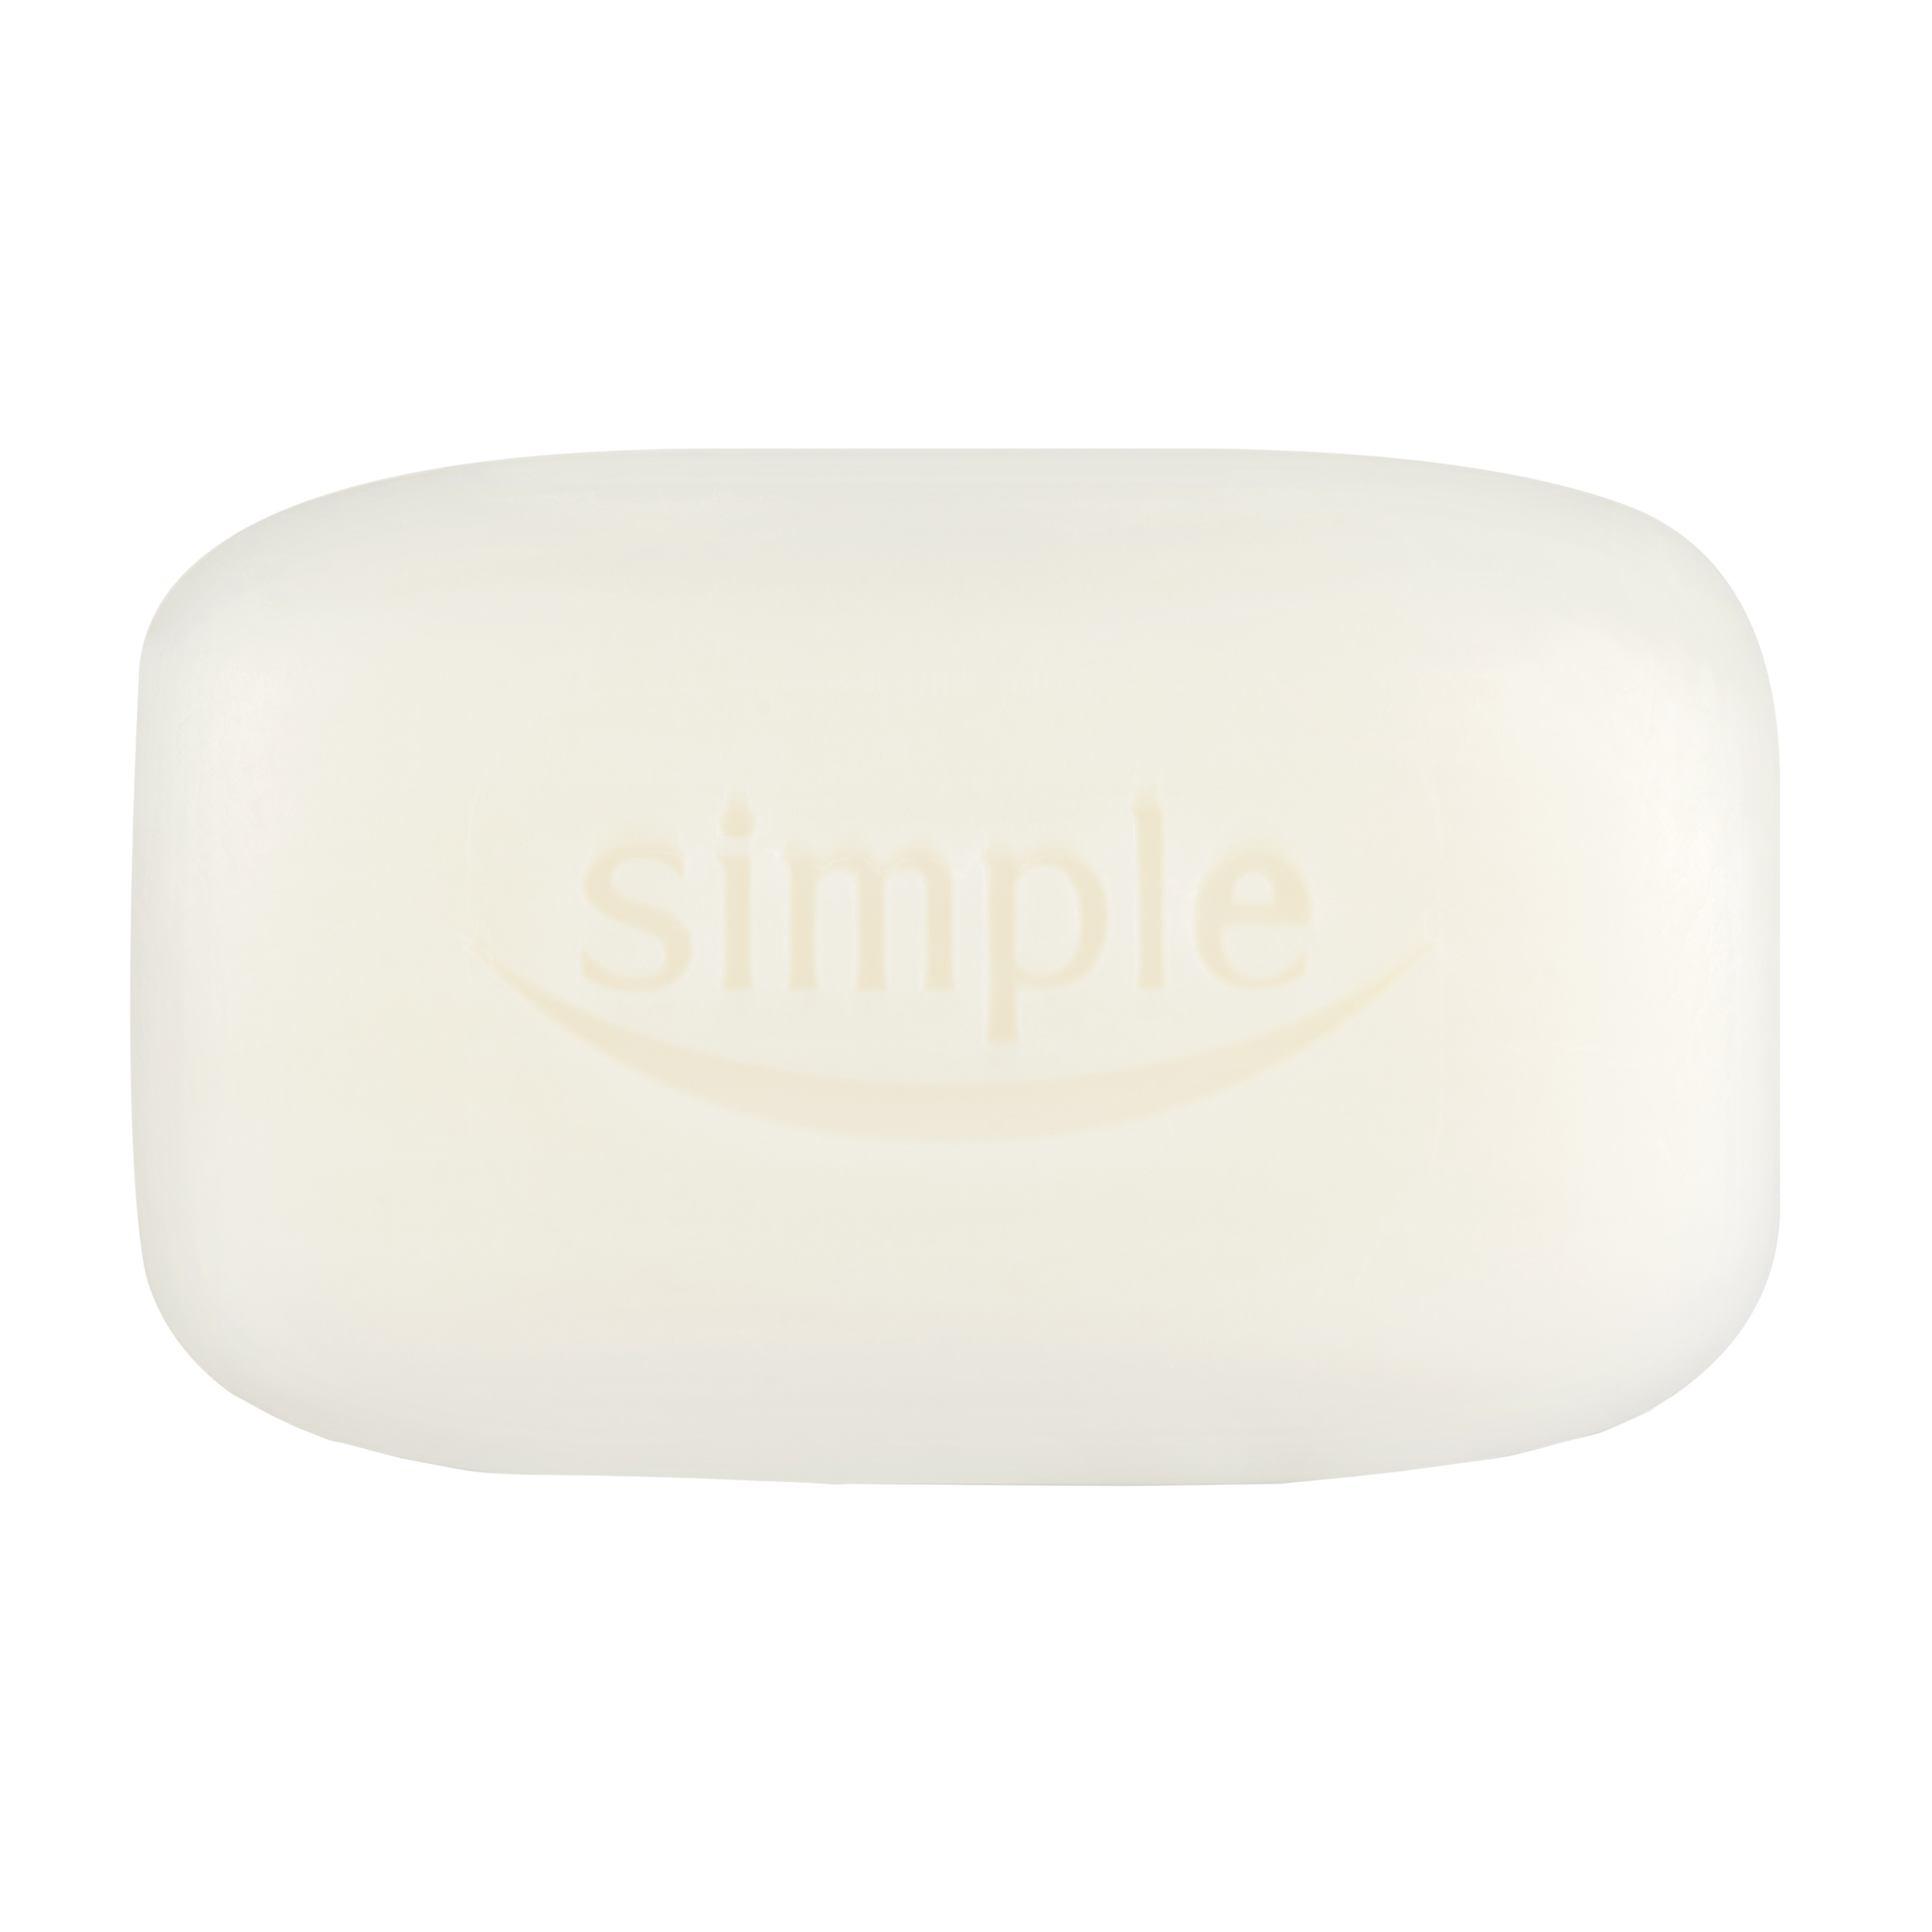 Simple Pure Soap 100g 2 Pack Image 2